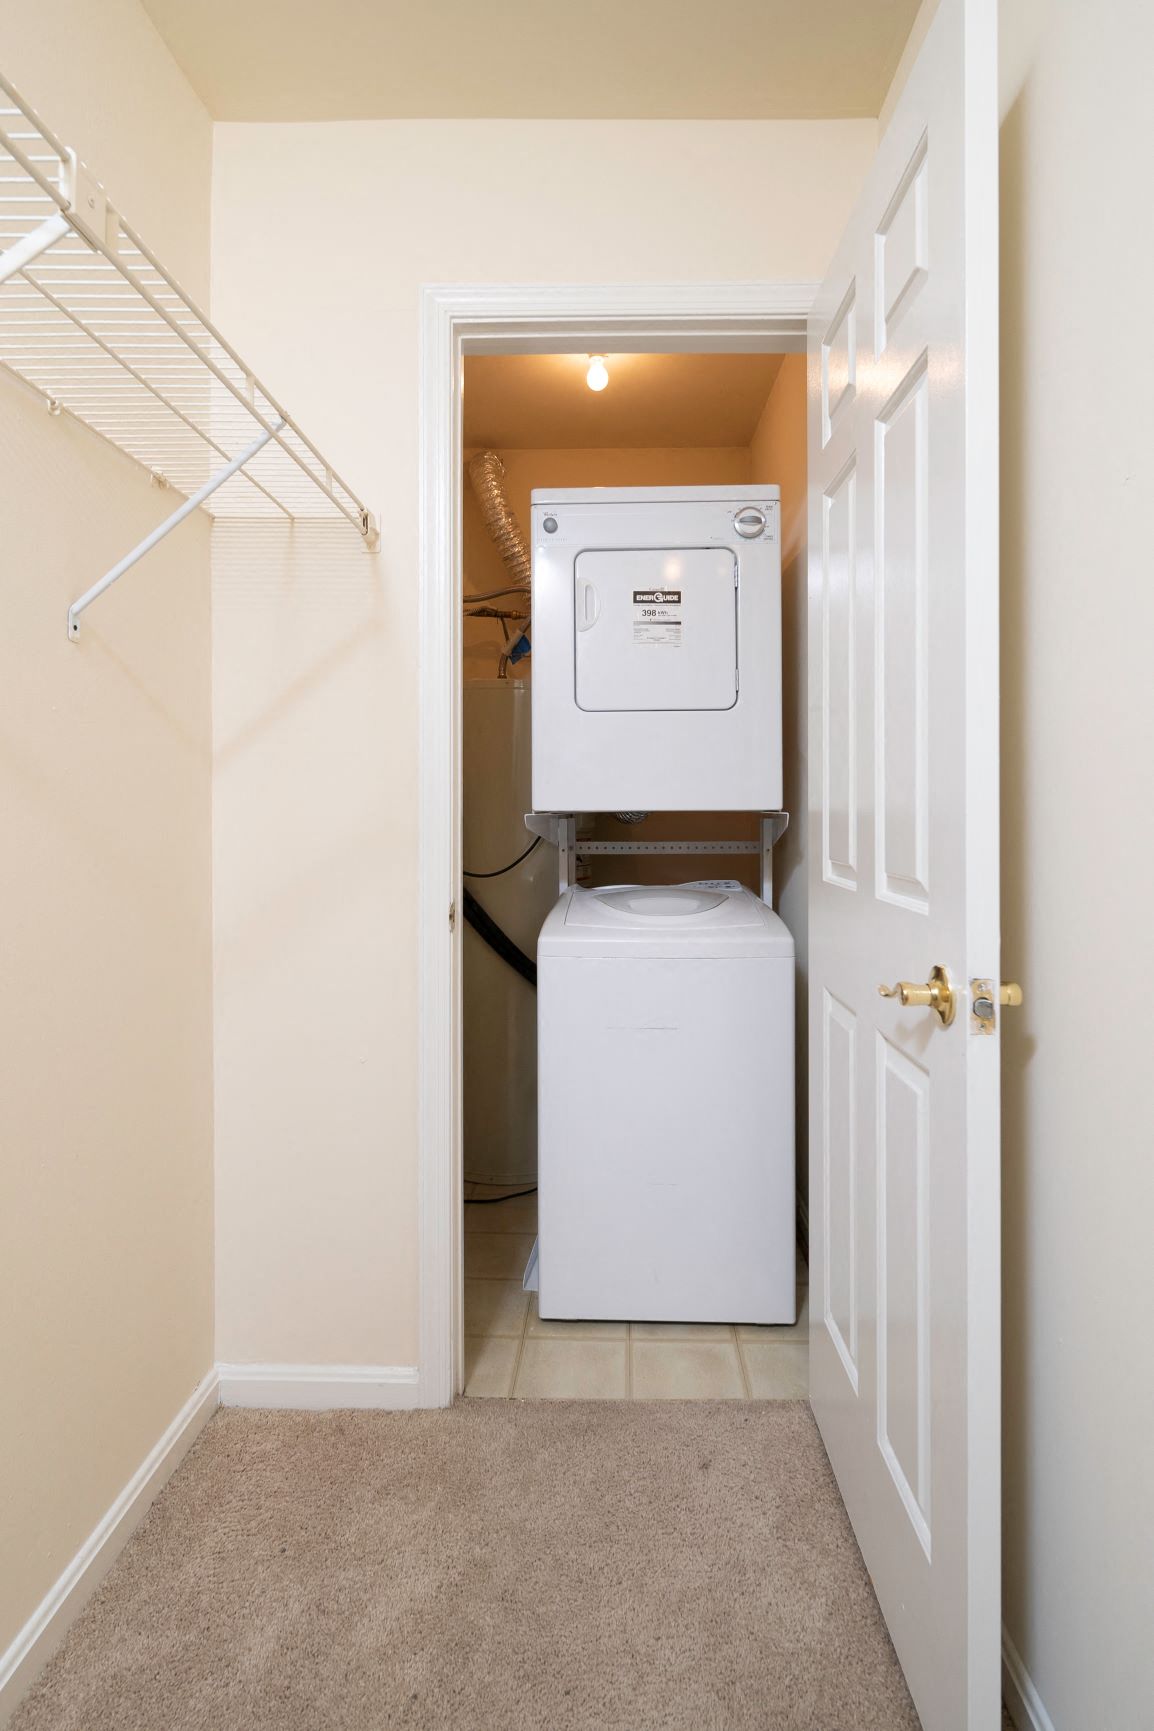 Washer and dryer in every apartment home